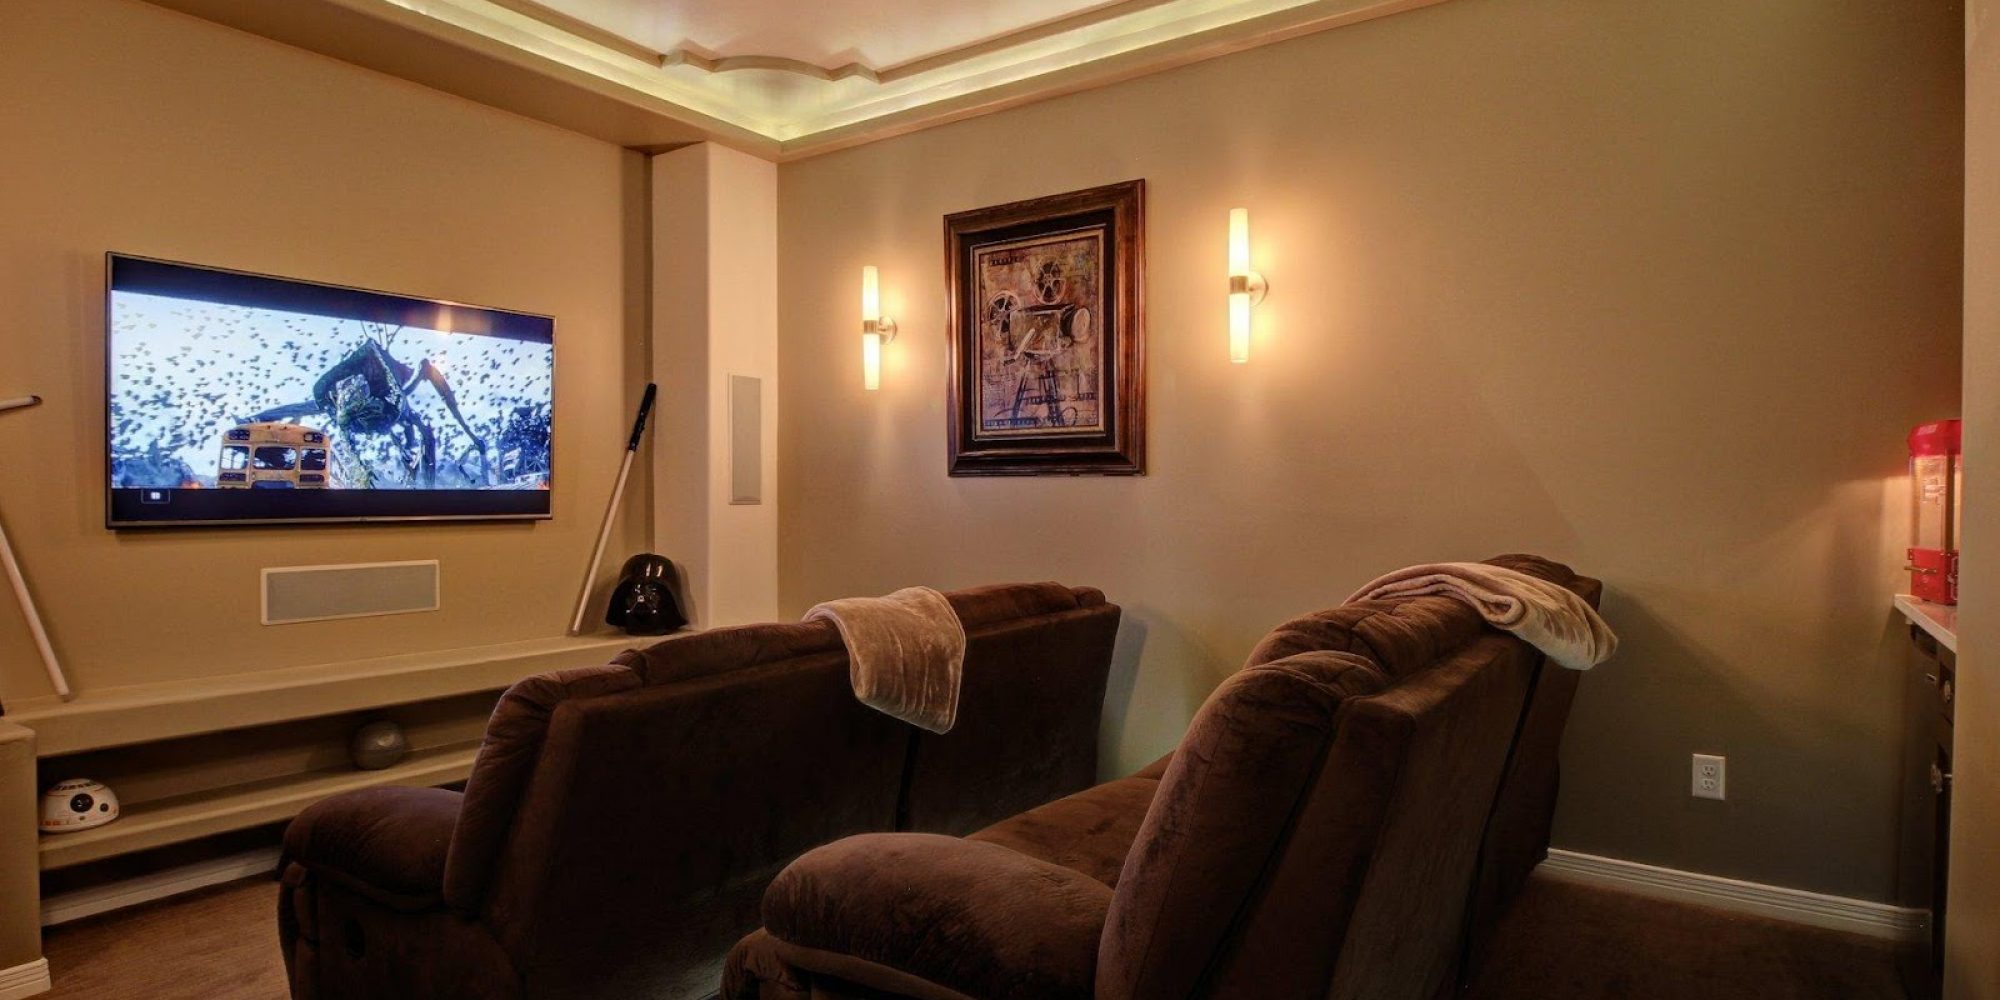 A beautiful home theater in Las Cruces